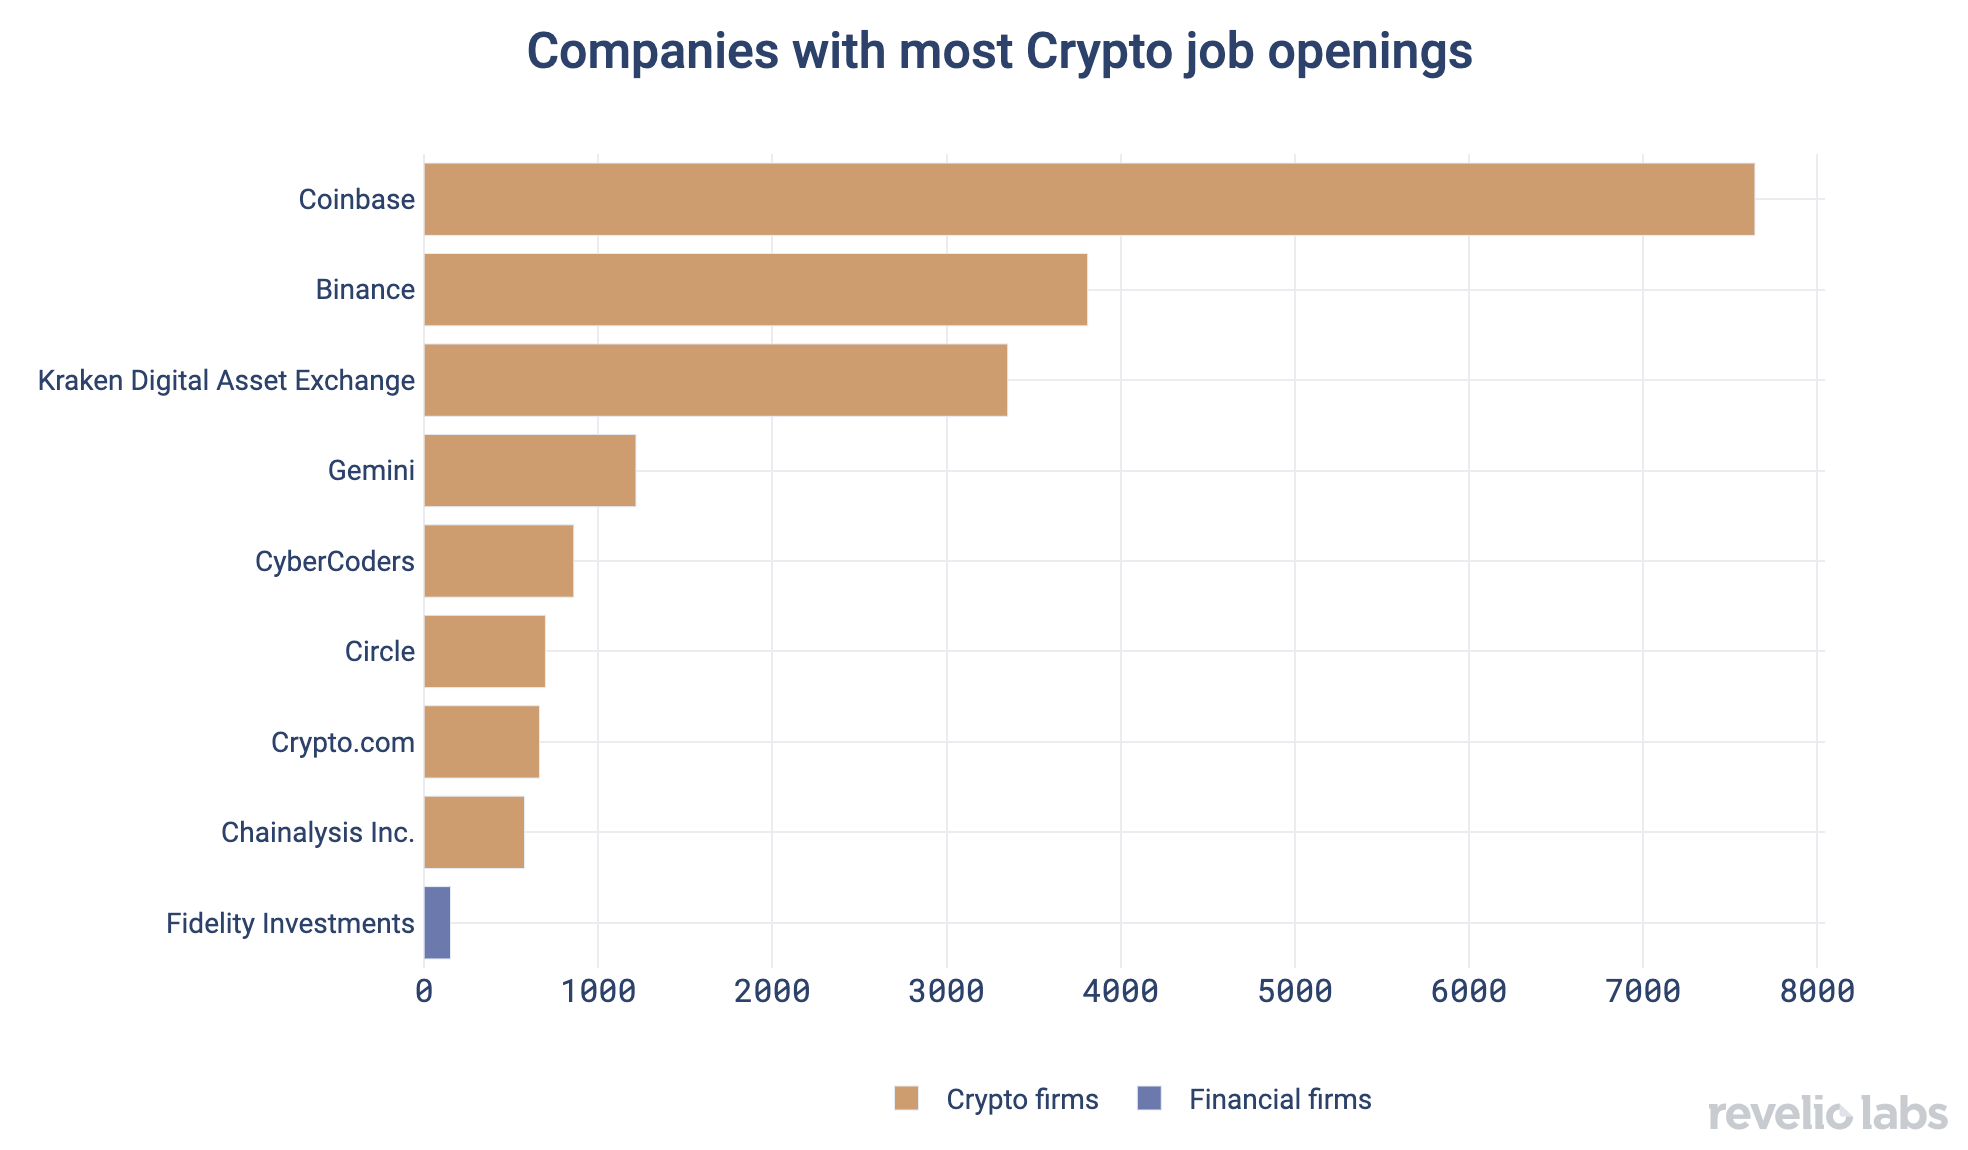 Companies with most crypto job openings